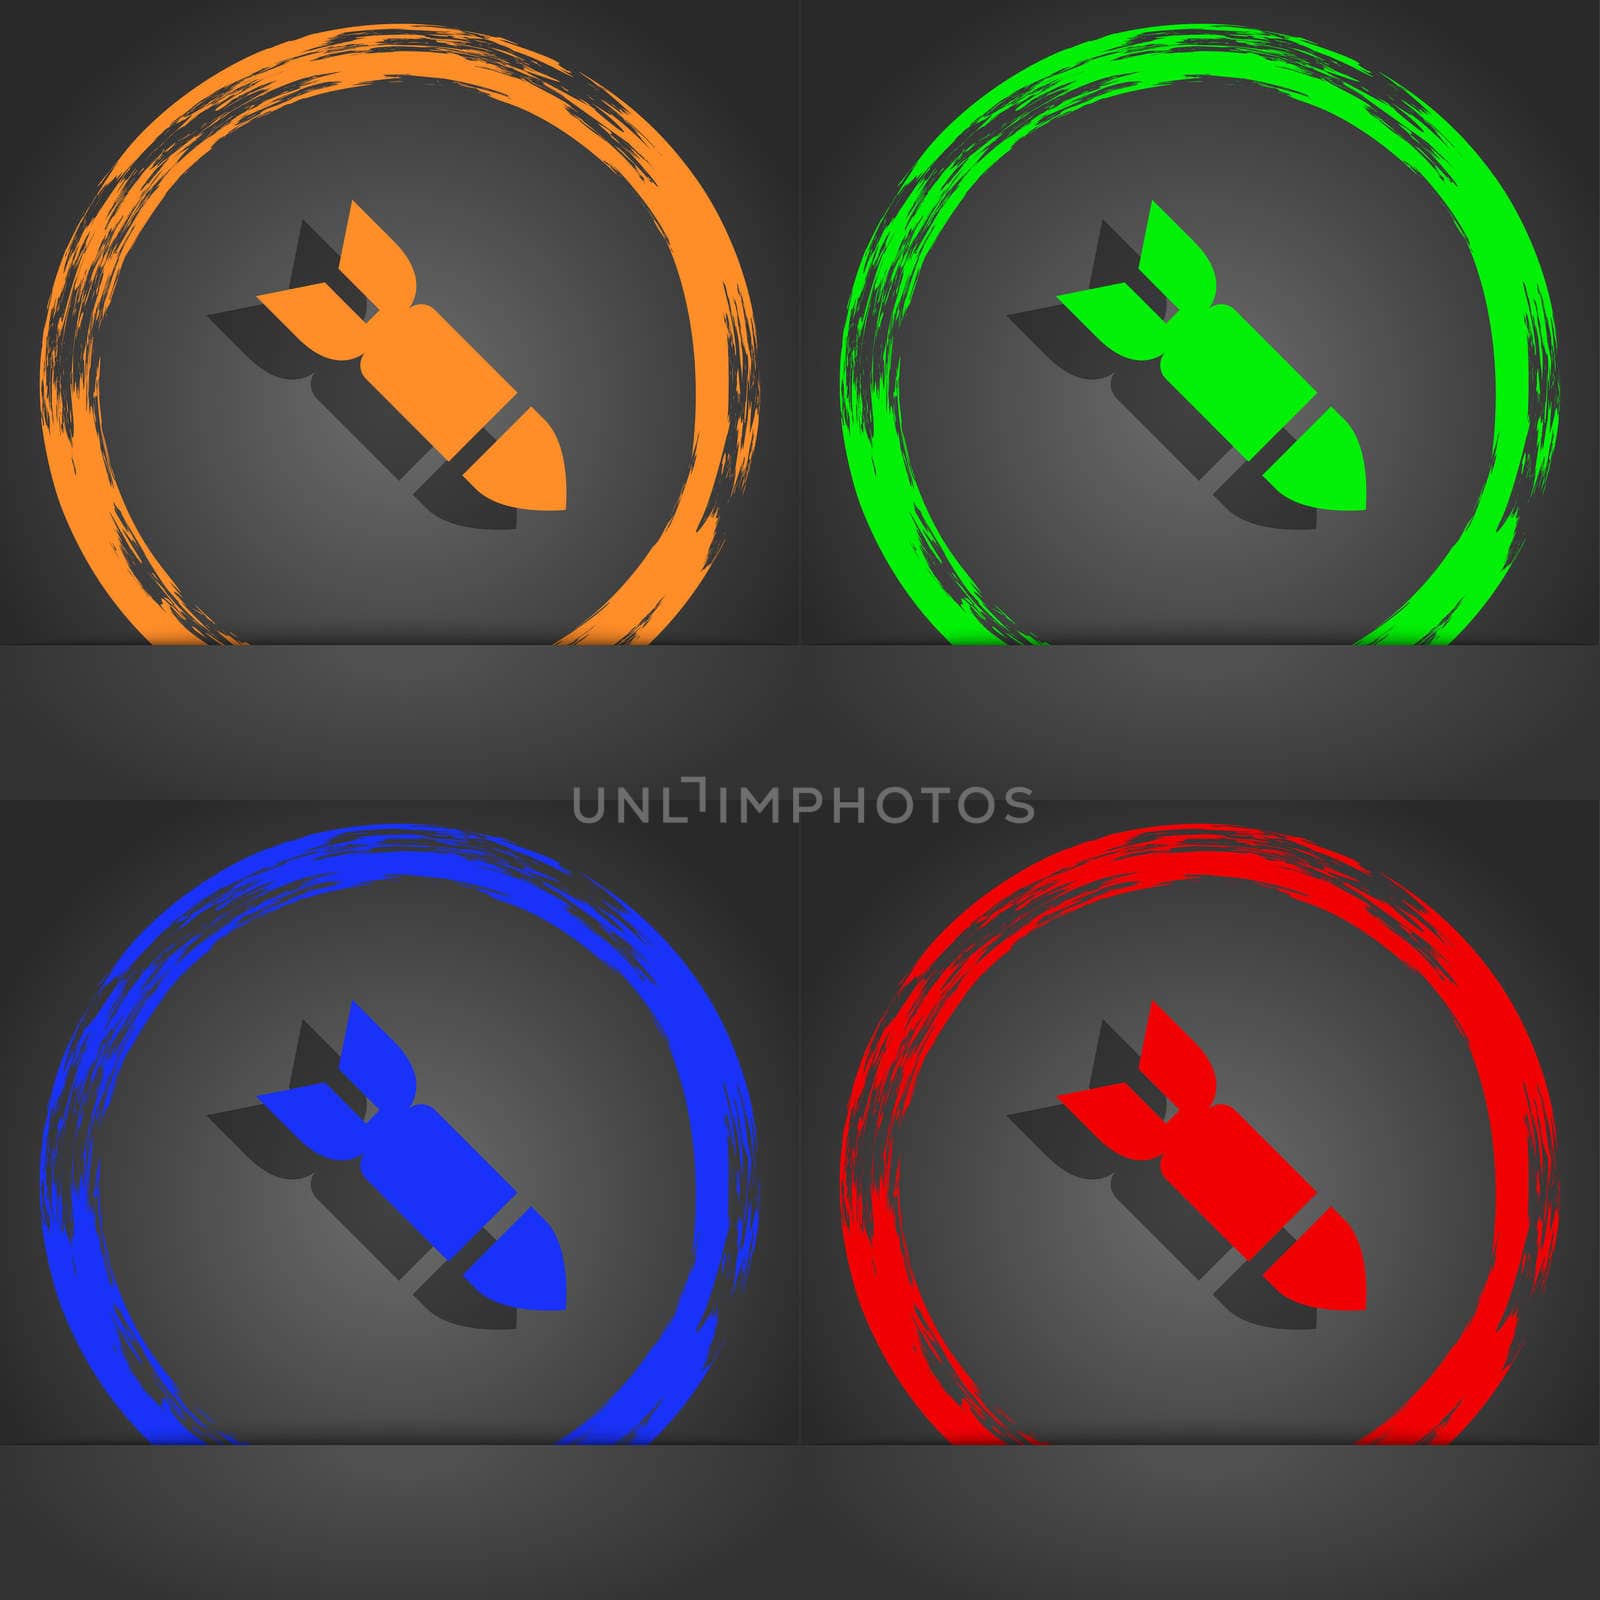 Missile,Rocket weapon icon symbol. Fashionable modern style. In the orange, green, blue, green design. illustration